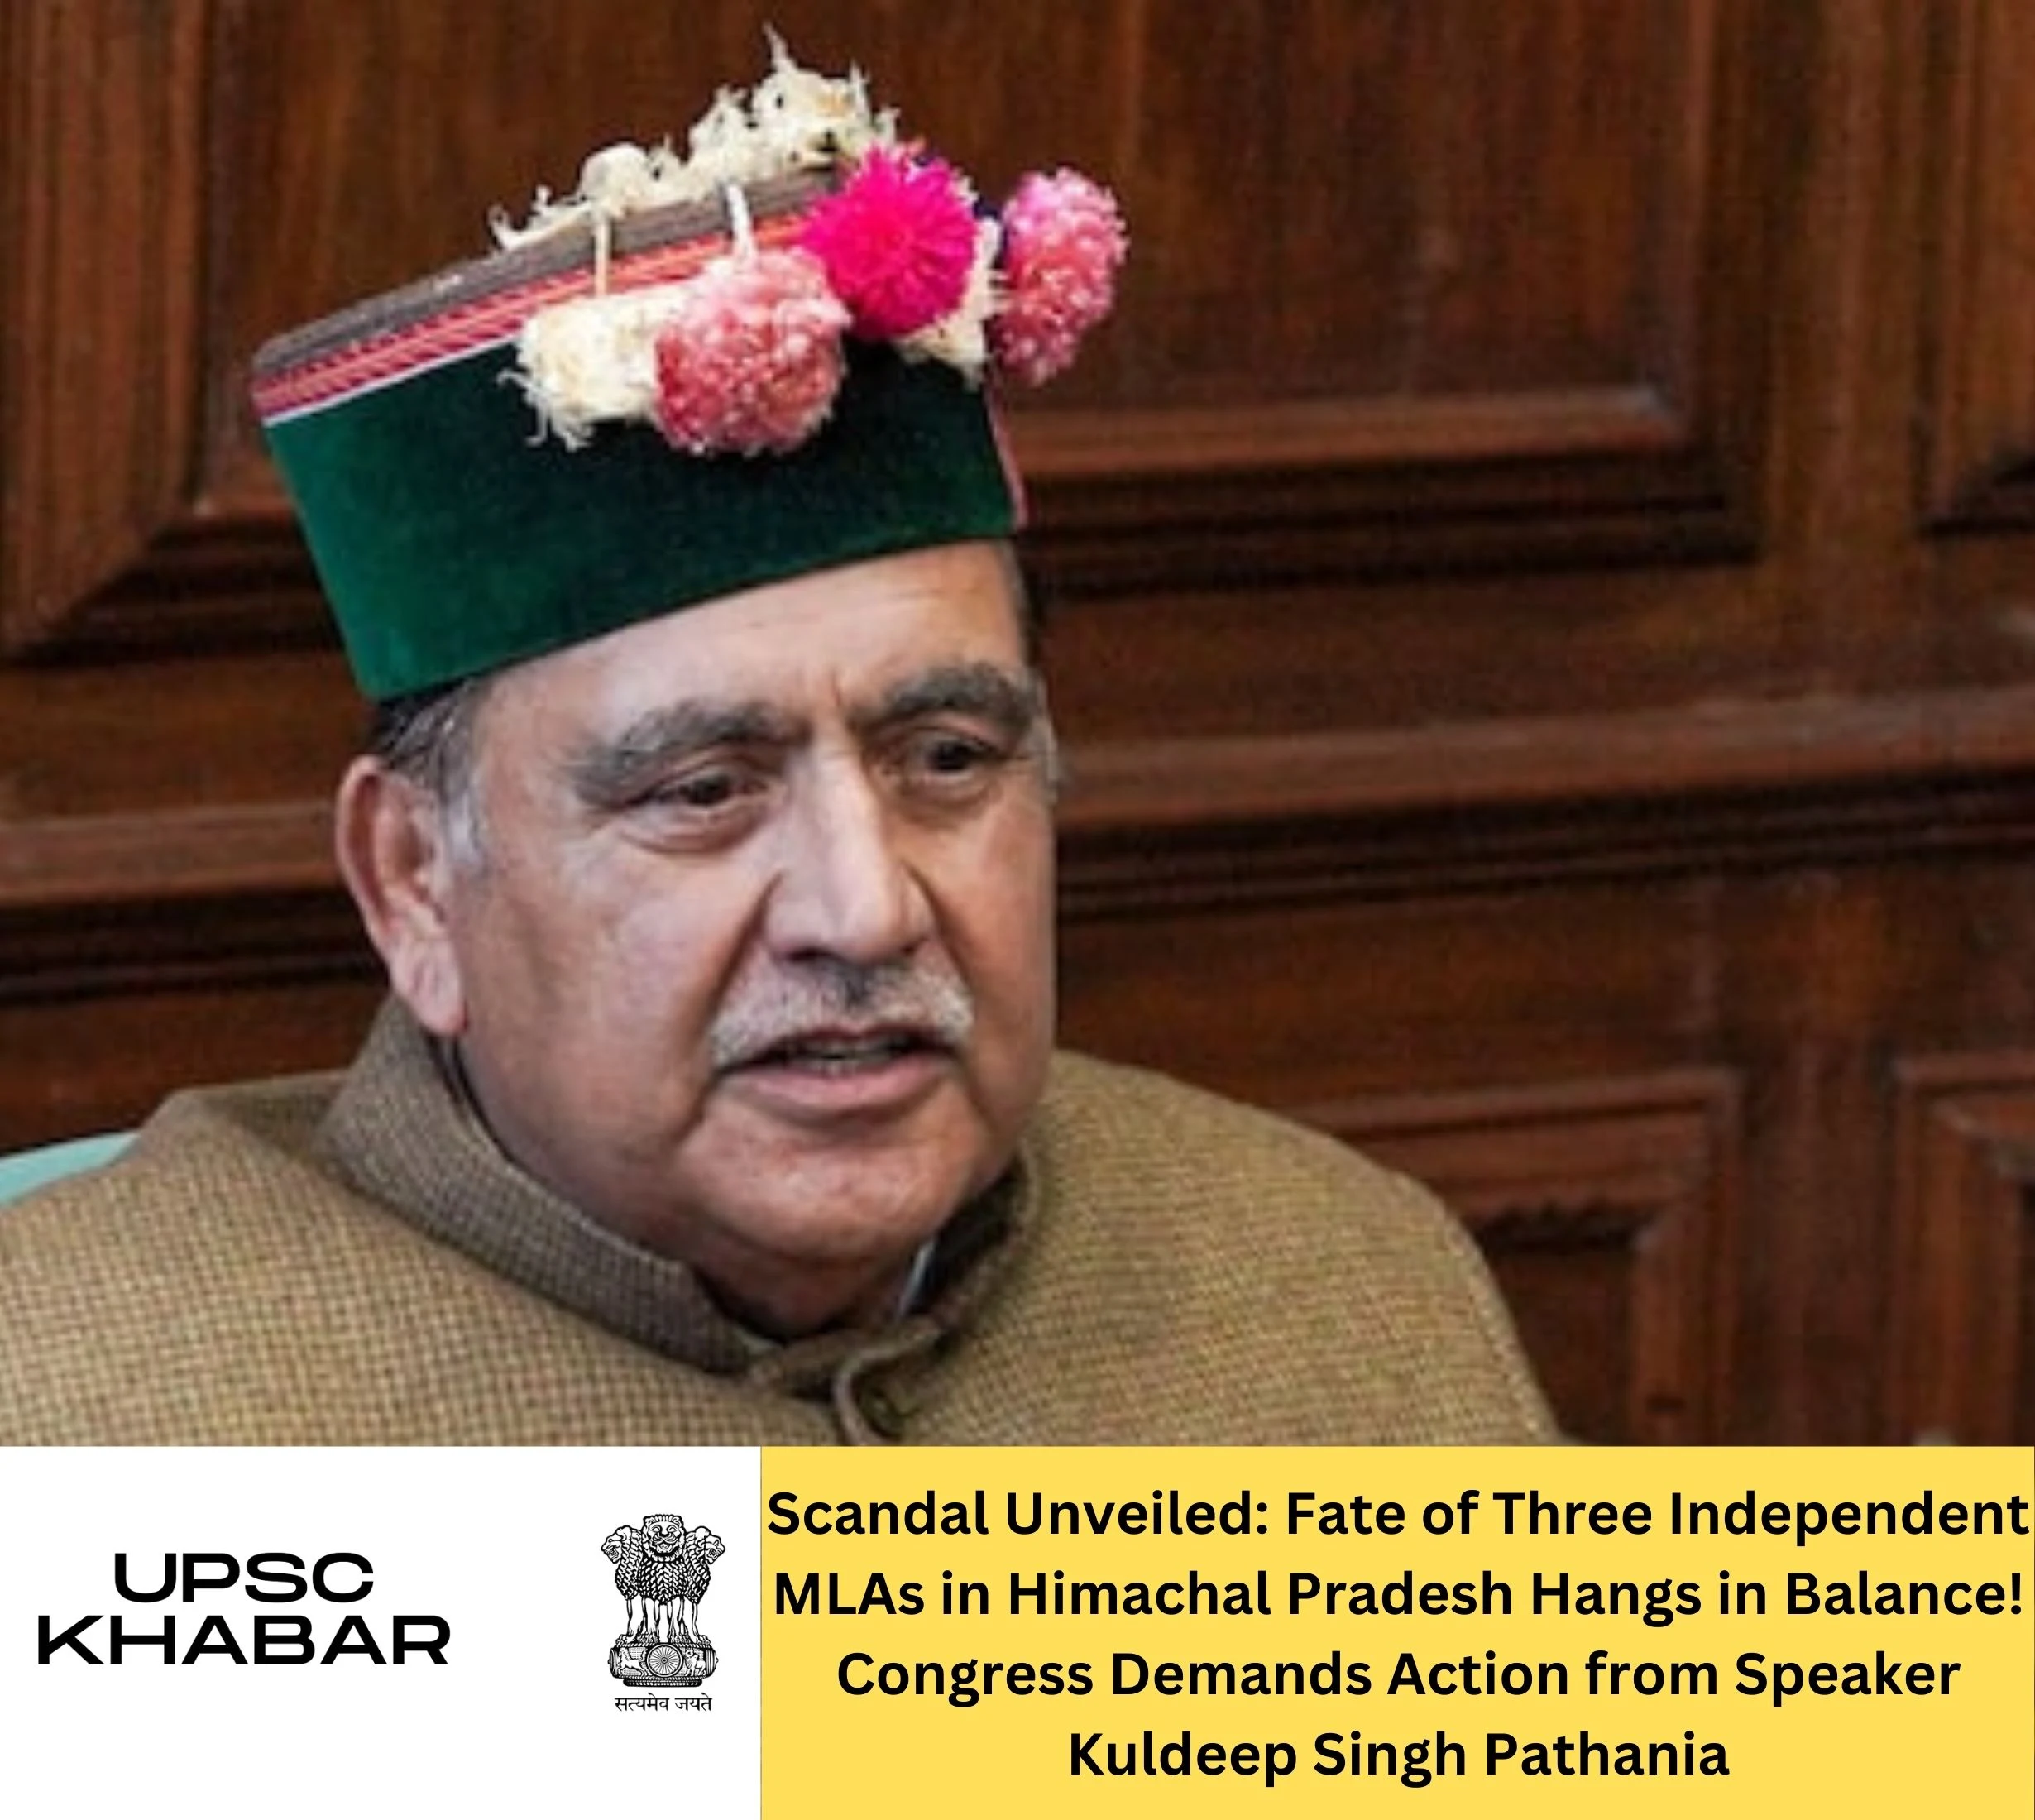 Scandal Unveiled: Fate of Three Independent MLAs in Himachal Pradesh Hangs in Balance! Congress Demands Action from Speaker Kuldeep Singh Pathania